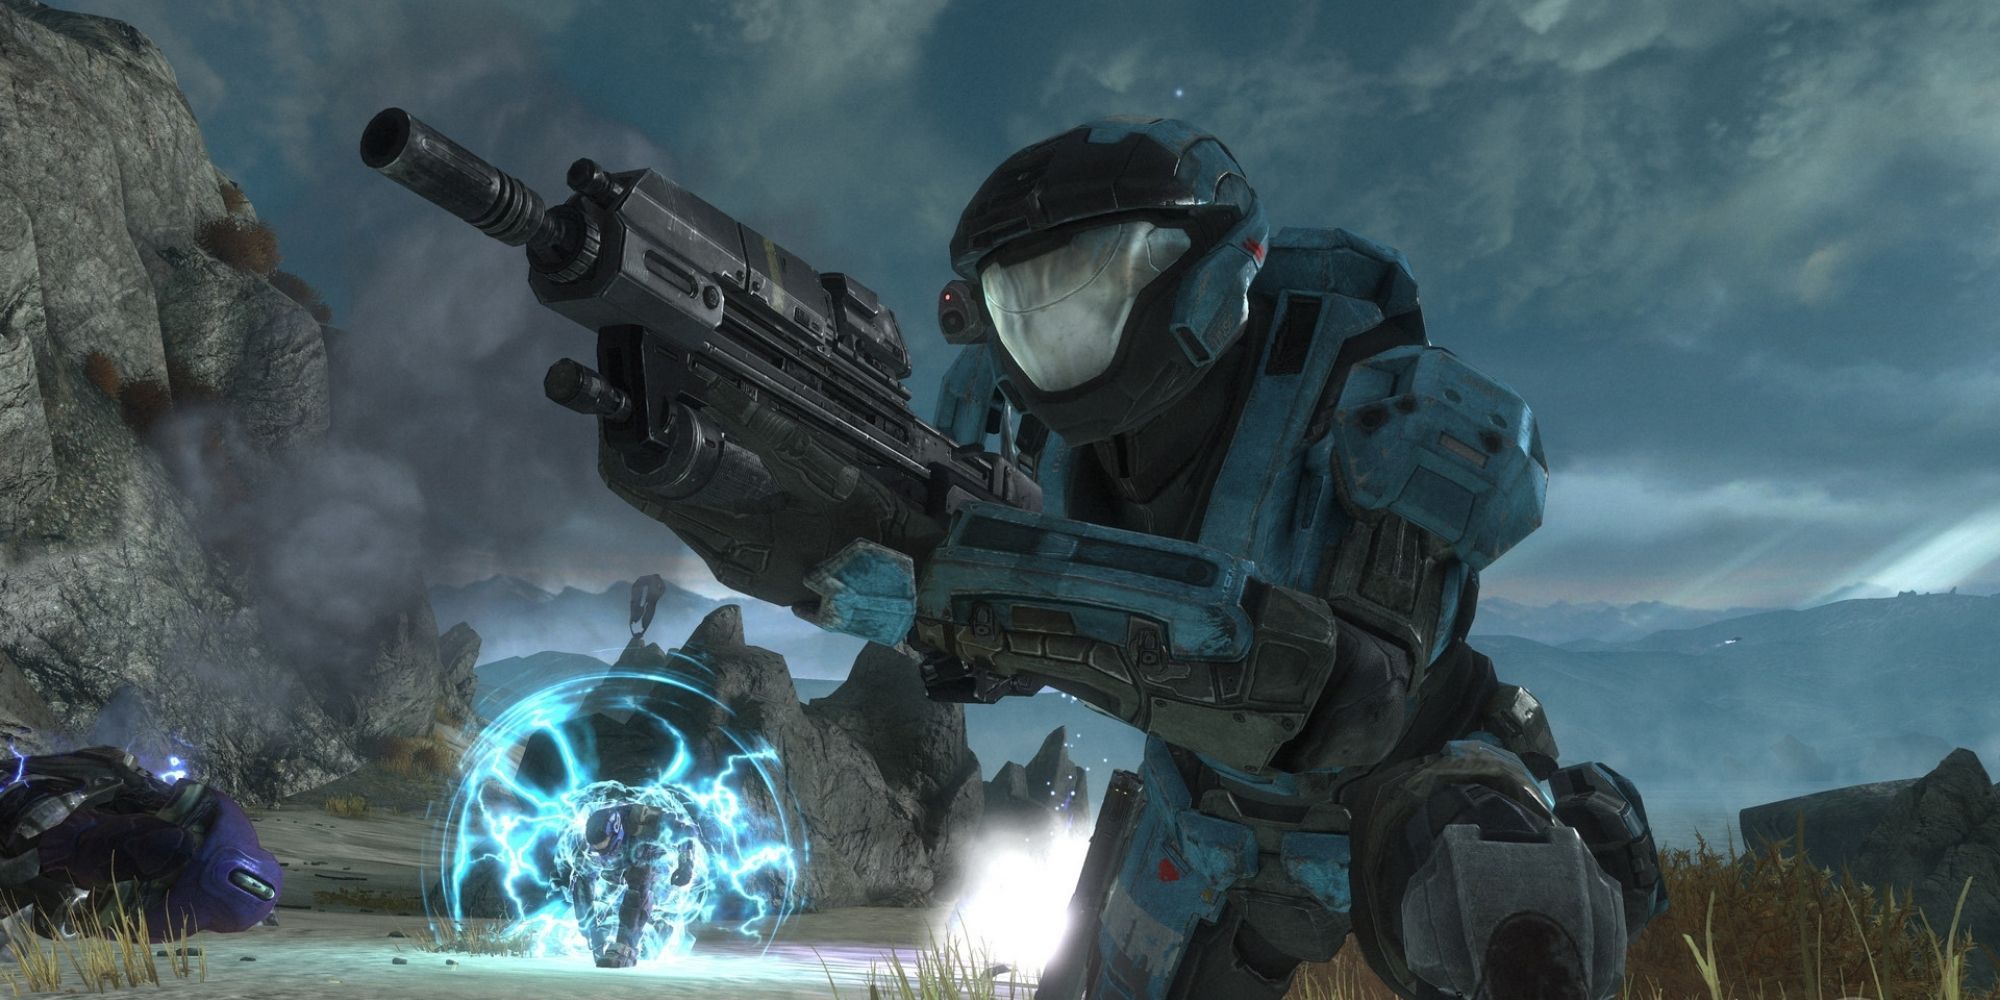 Kat in combat with the Covenant during the events of Halo: Reach